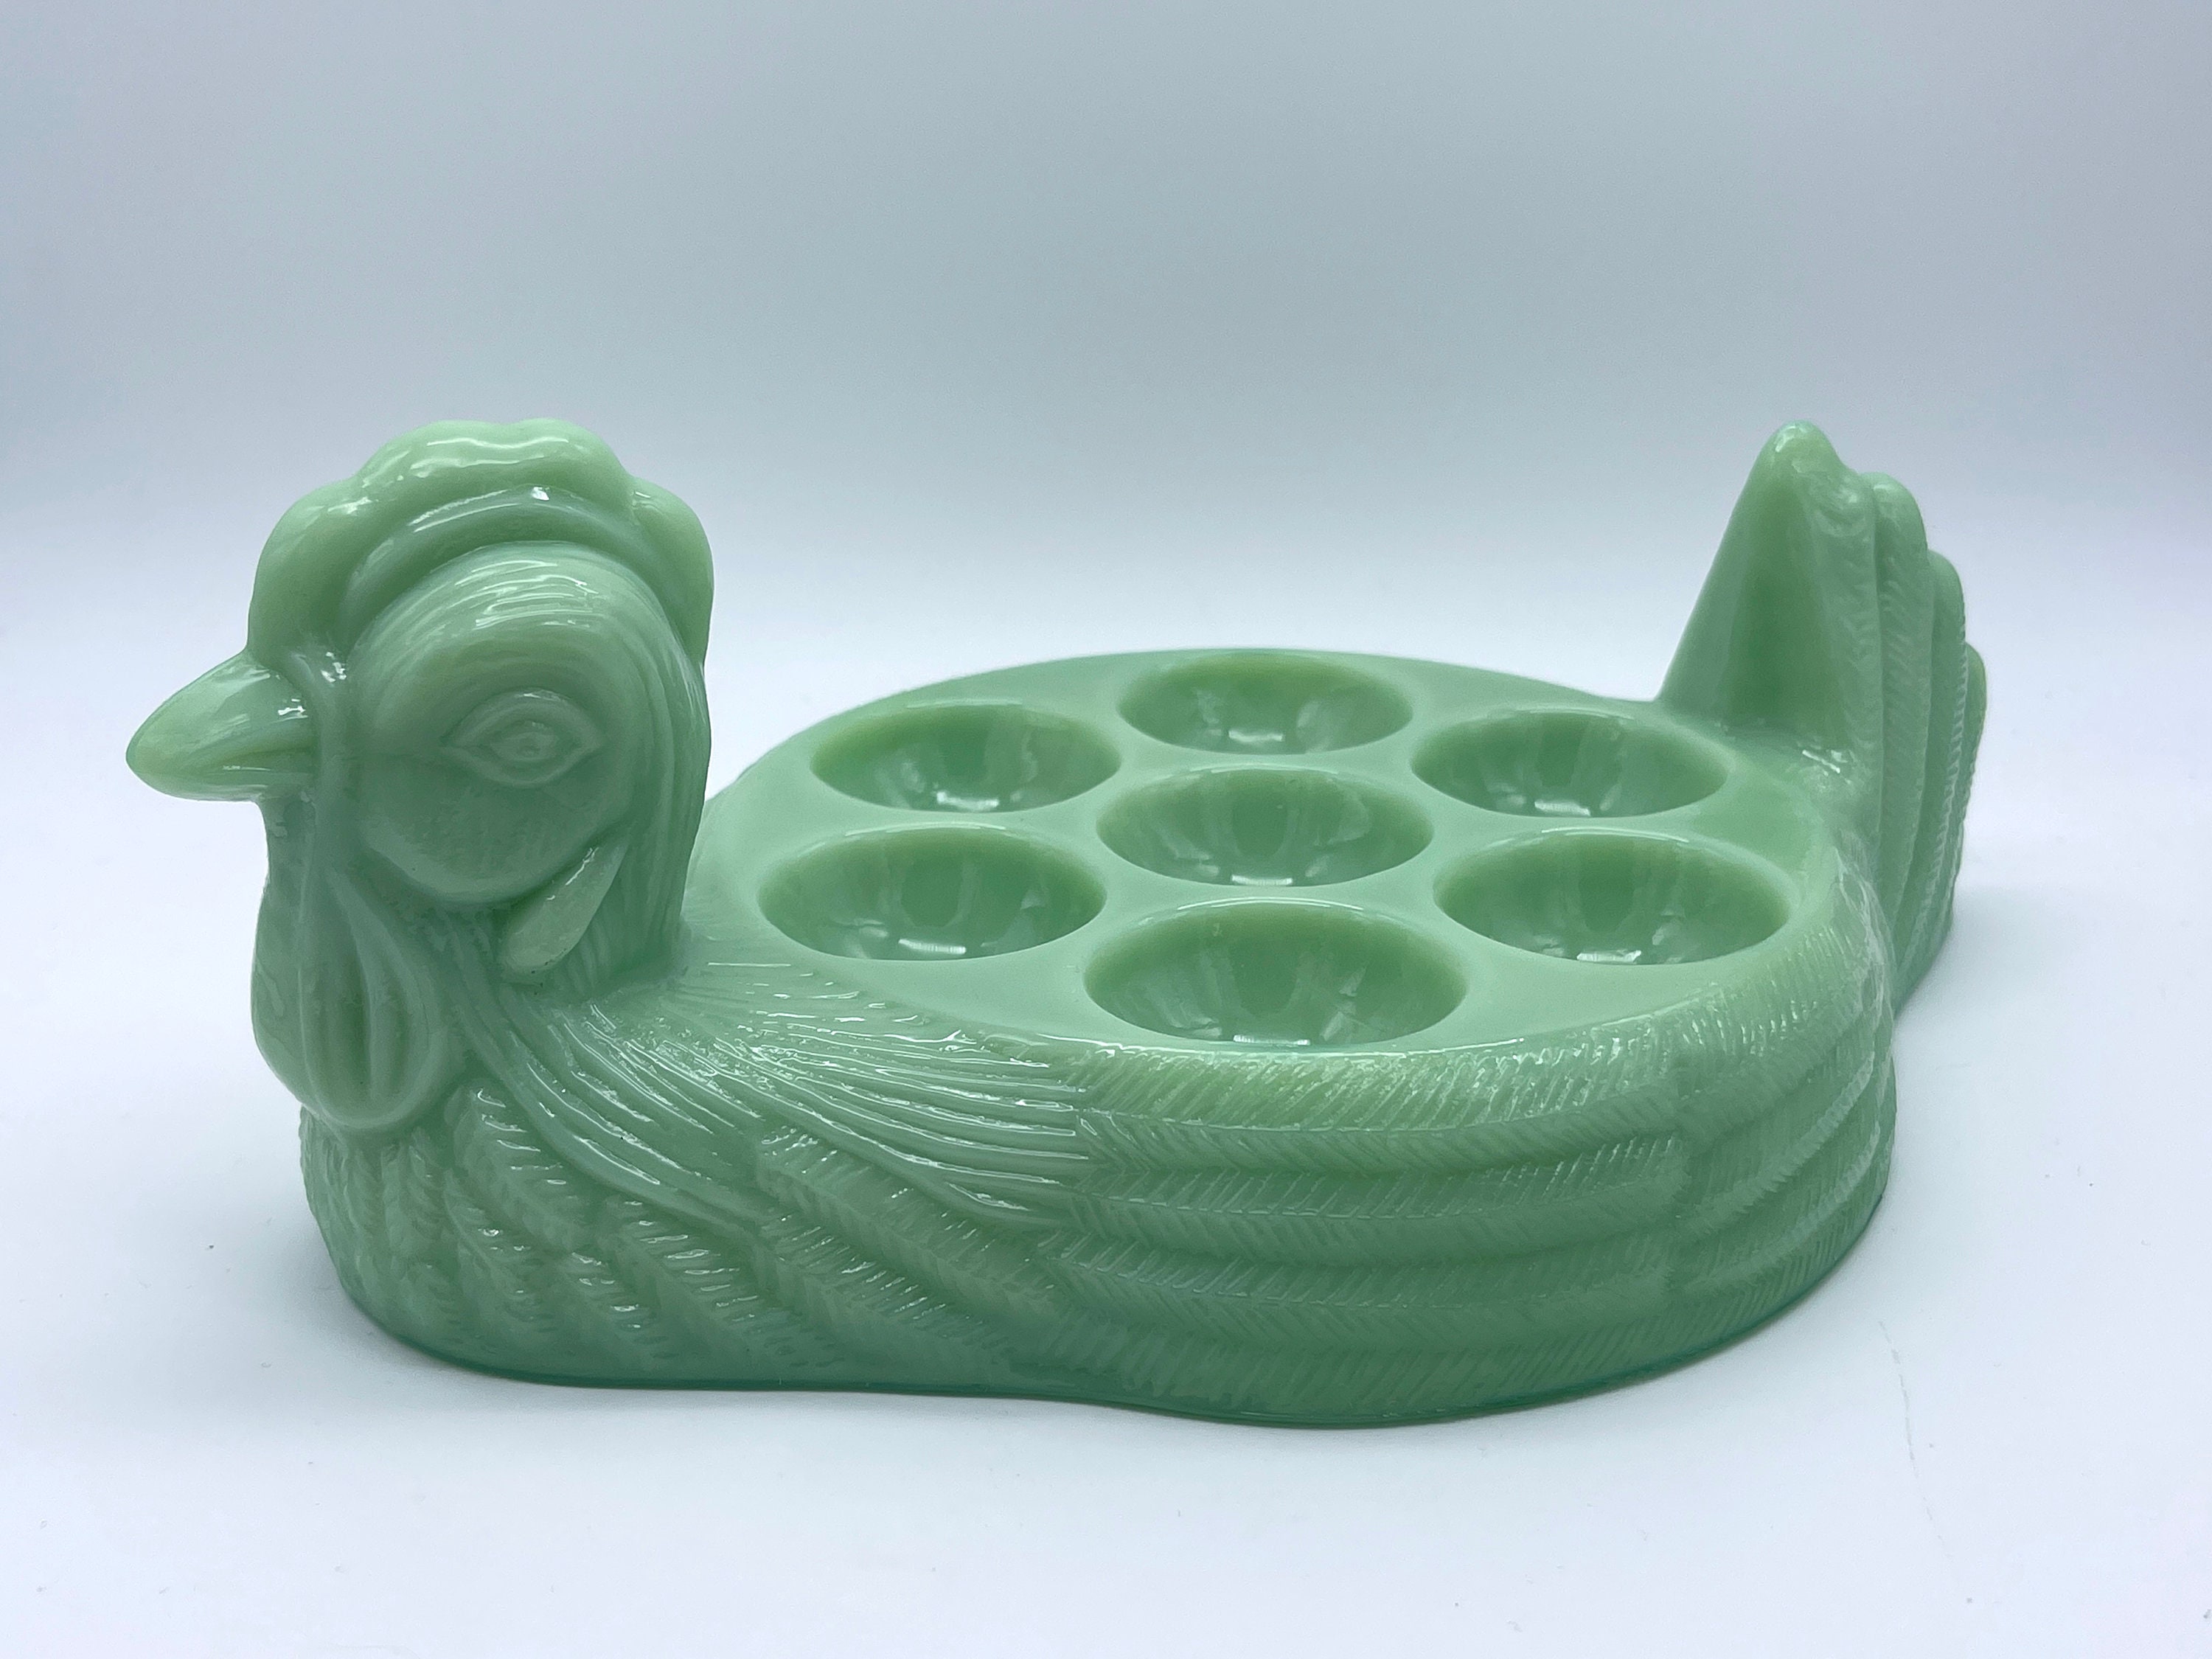 Cool New Chicken Egg Basket in Blue and Green Design Ceramic